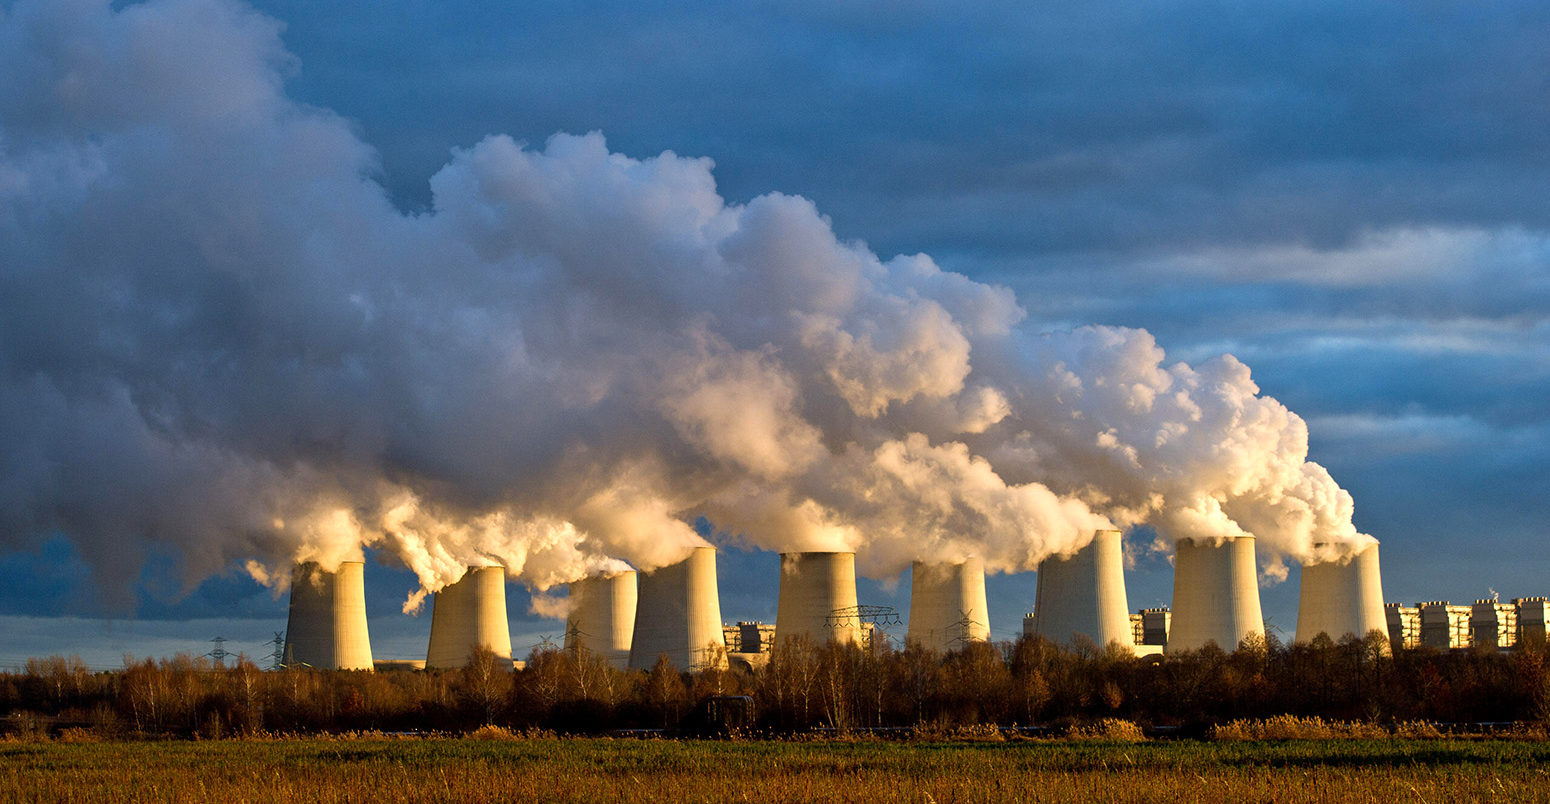 Cooling towers of a brown coal power station in Jänschwalde, Germany. Credit: dpa picture alliance archive / Alamy Stock Photo.